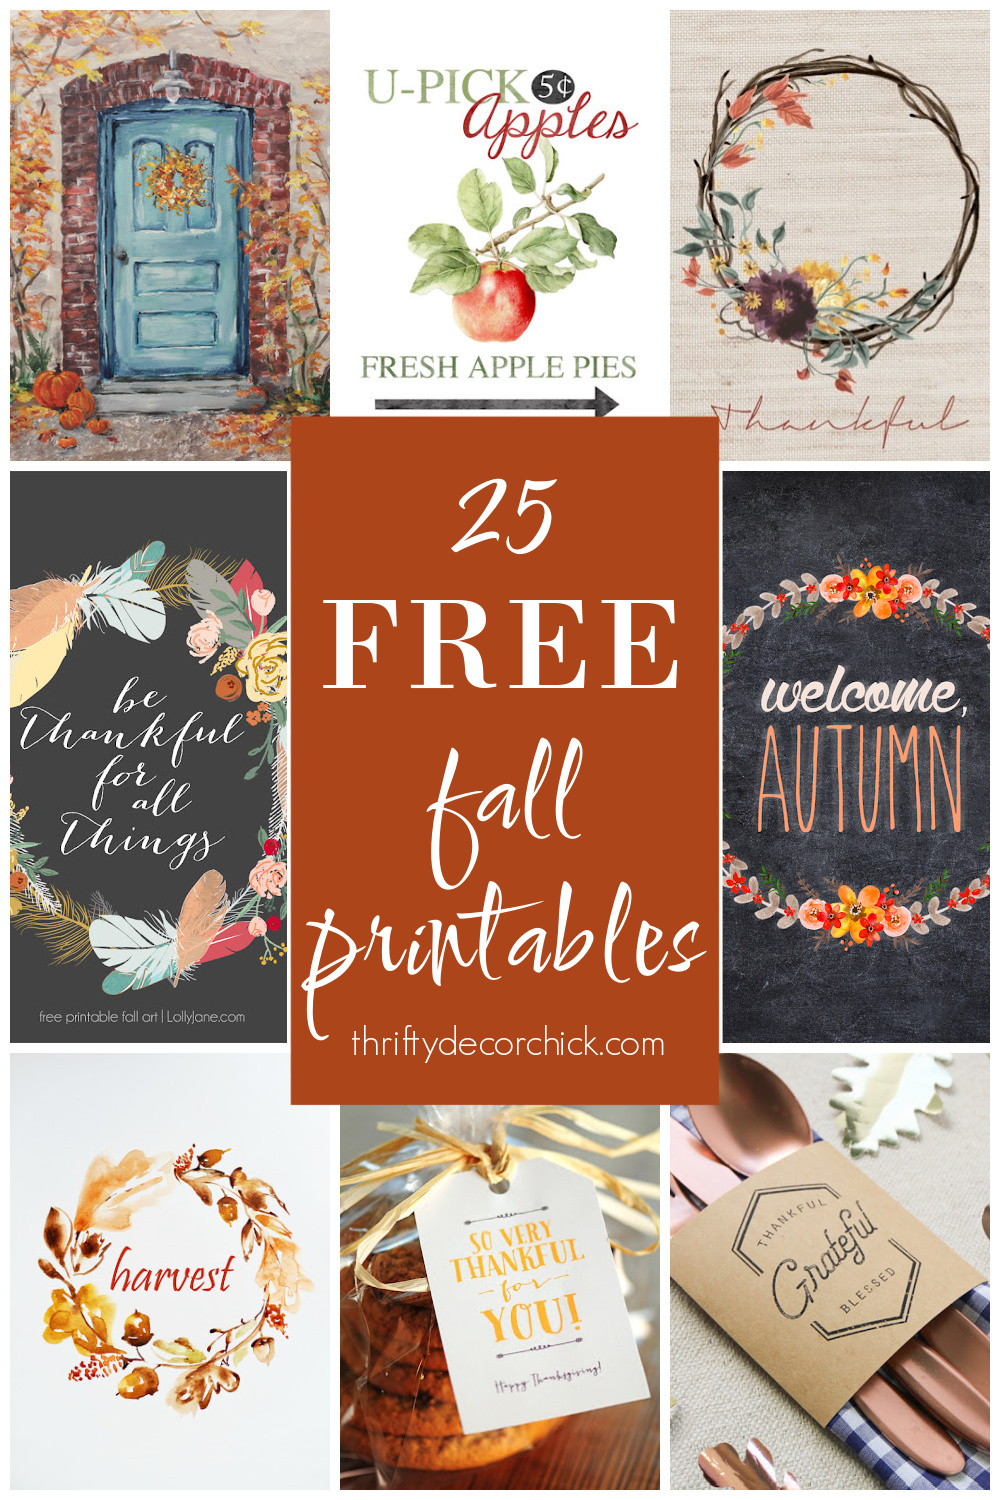 25 Free Fall Printables For Autumn Decorating | Thrifty Decor throughout Free Autumn Printables